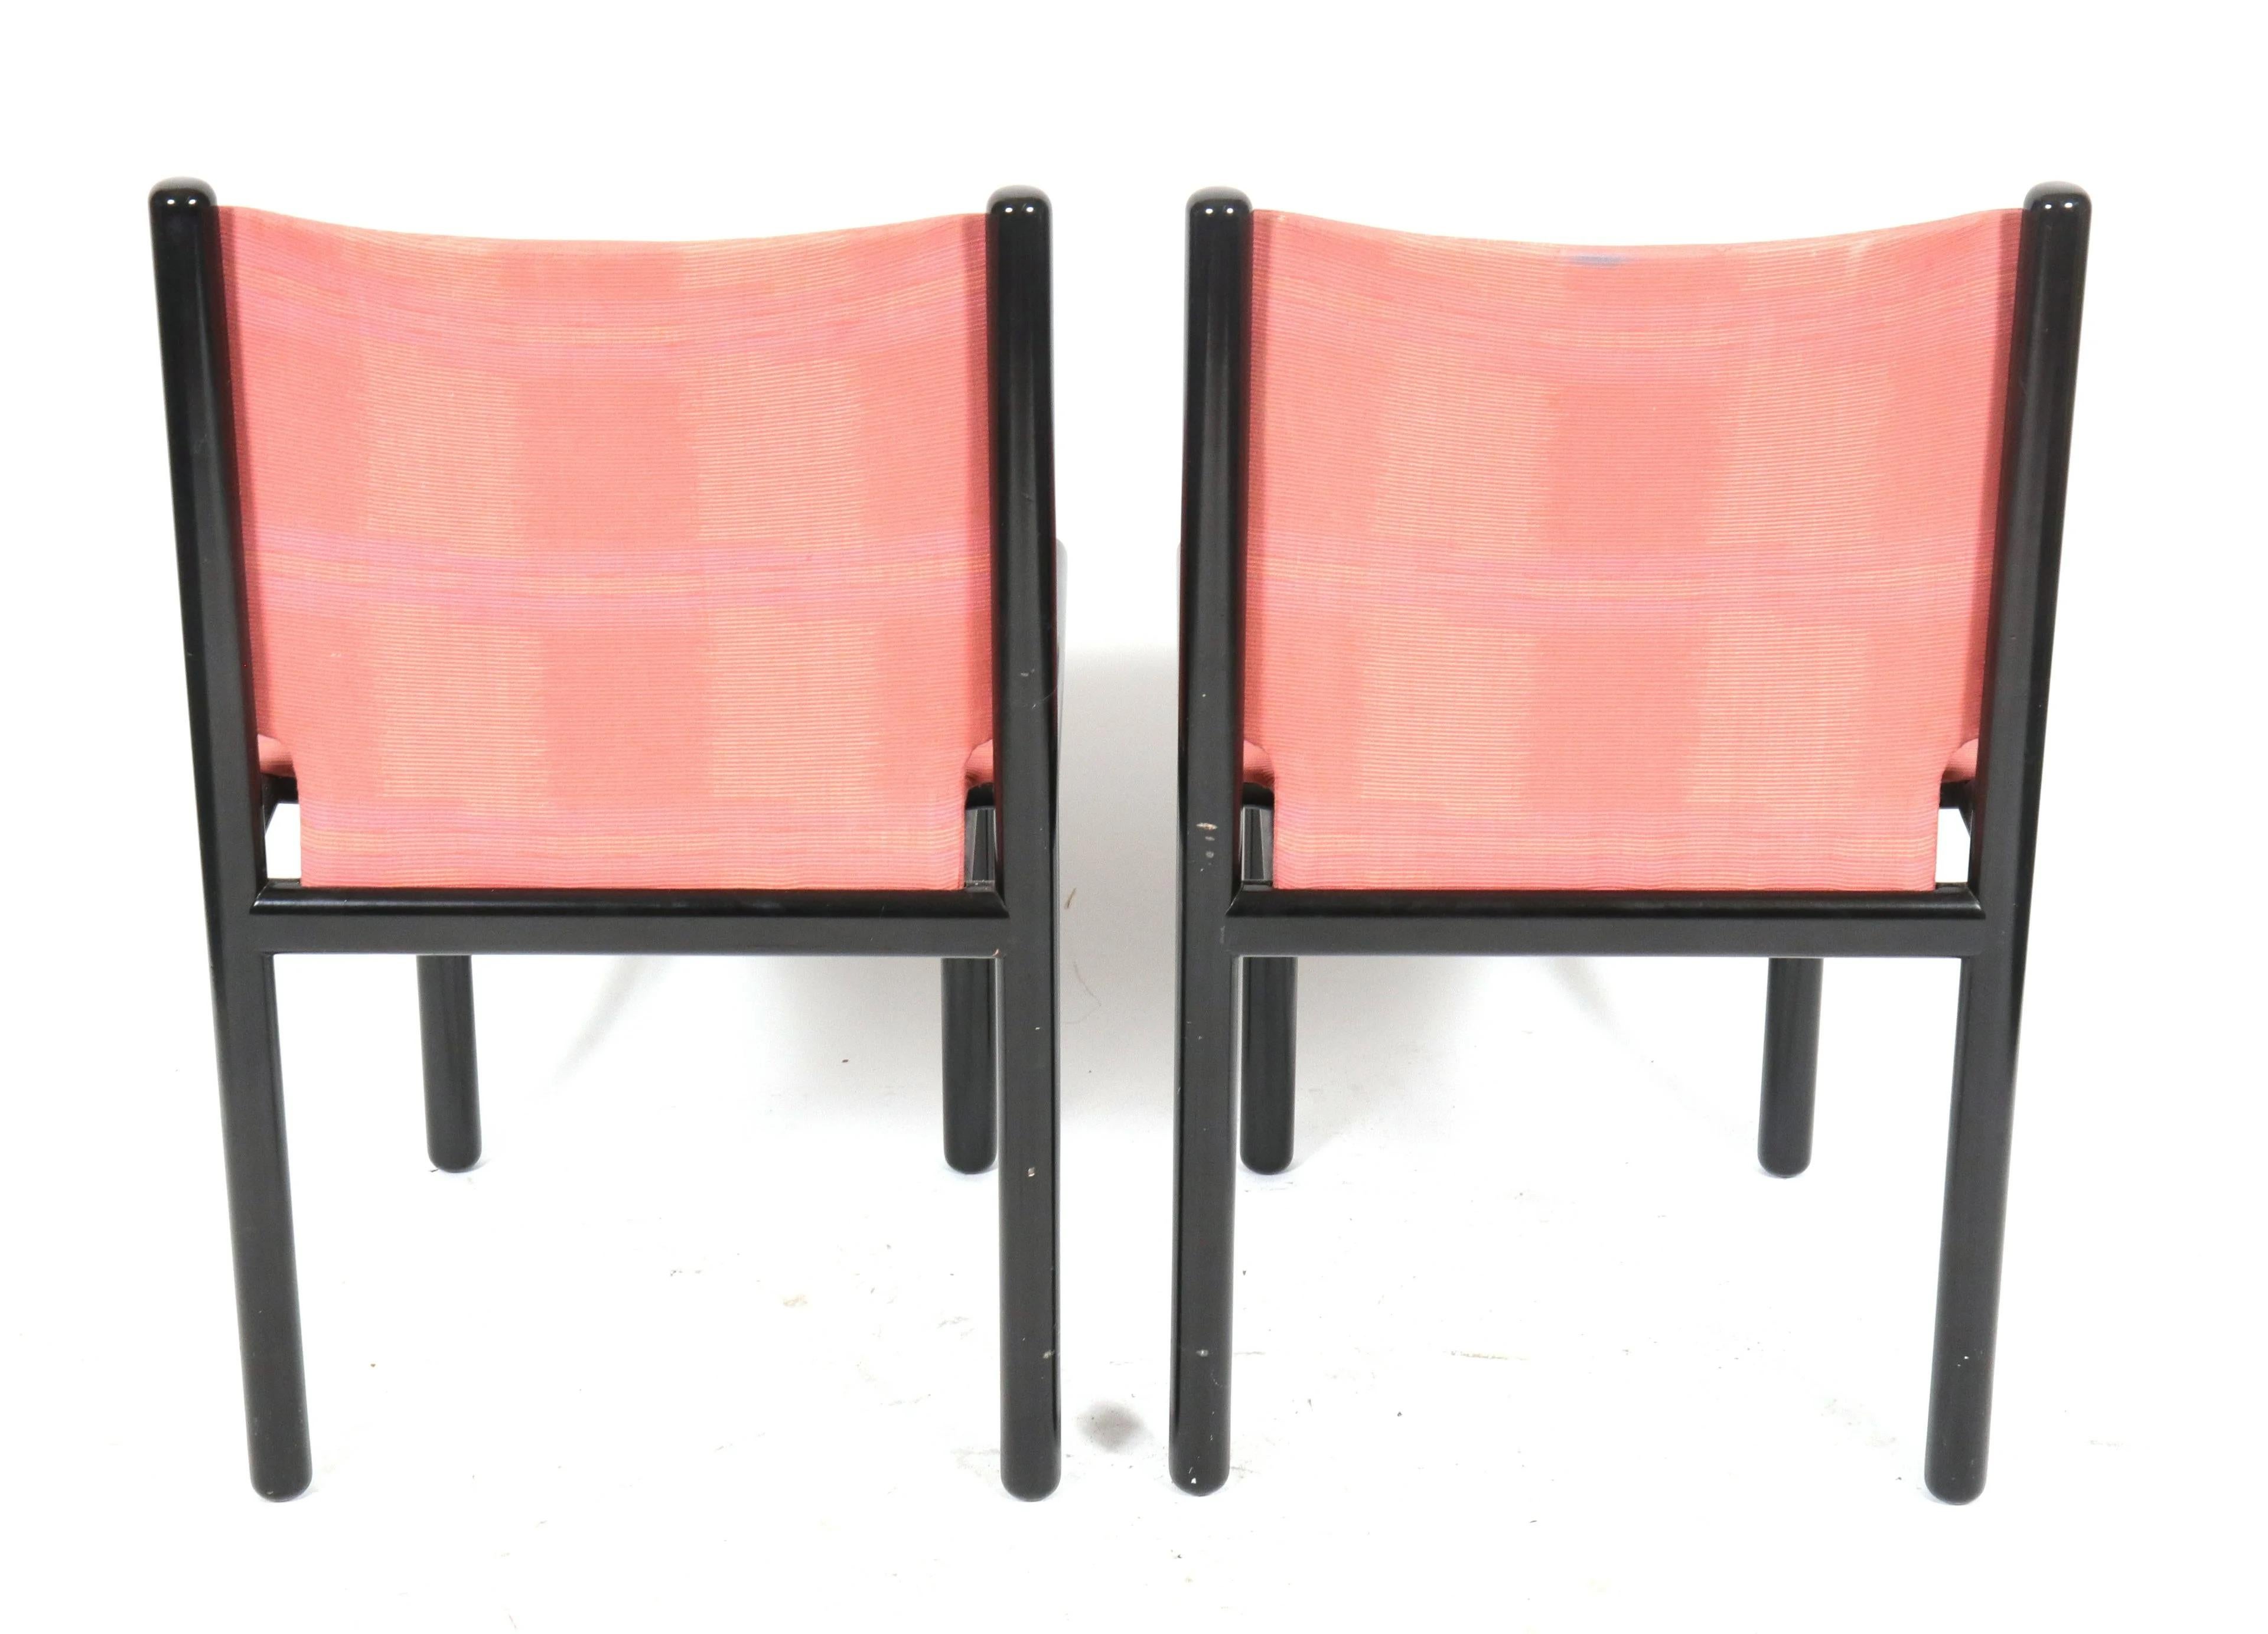 Italian Gianfranco Frattini for Cassina Dining Chair, Black Lacquered Frame, Pink, 1985 For Sale